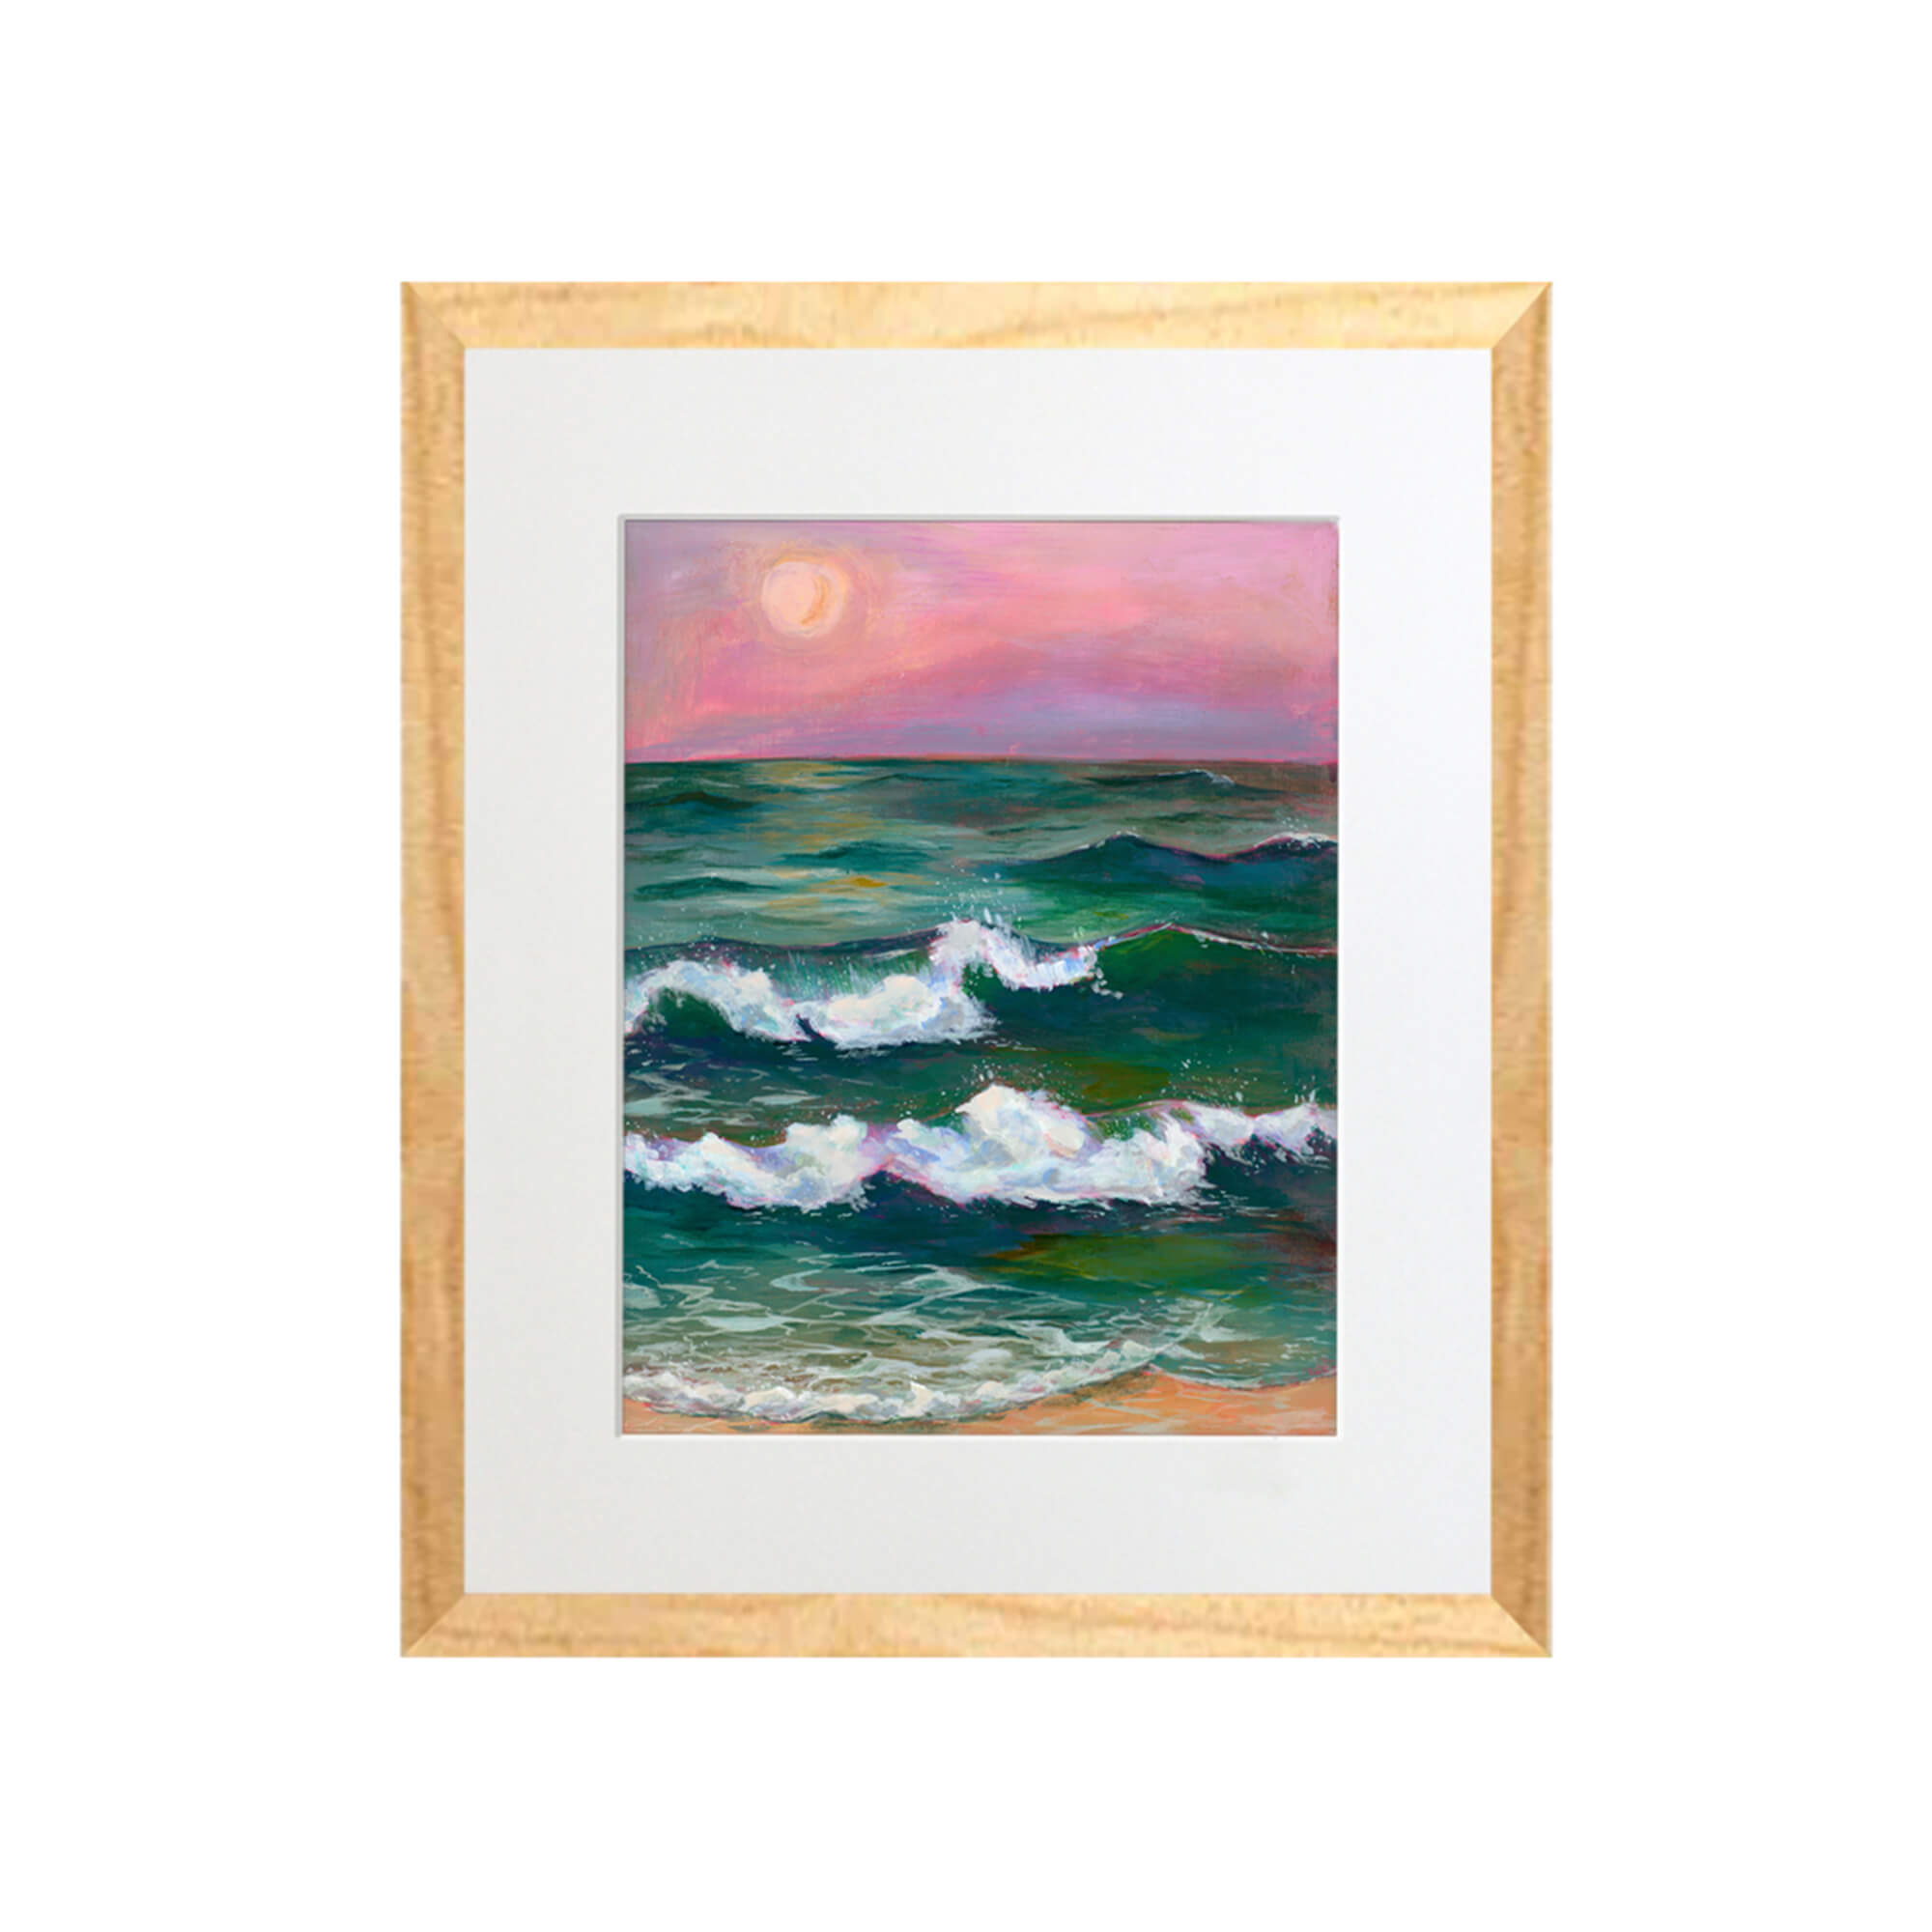 A pink sky and emerald colored ocean water by Hawaii artist Lindsay Wilkins